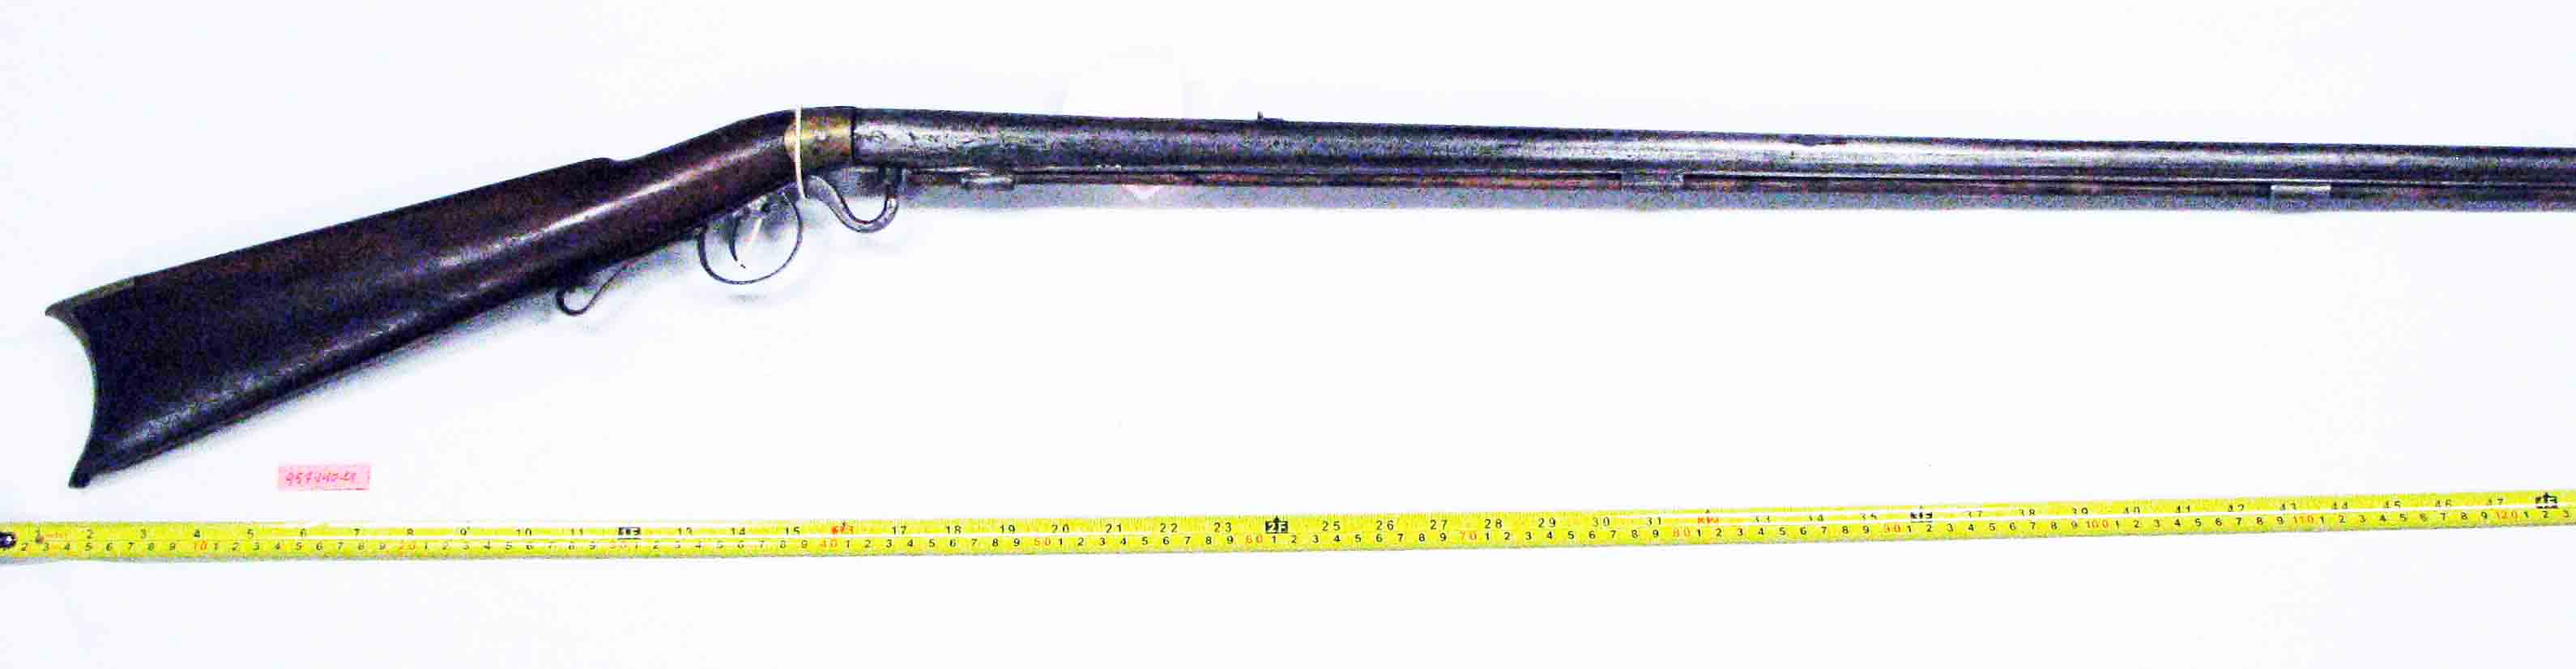 a%20bottom-firing%20lint-primed%20musket%20with%20a%20round%20barrel%20and%20.50%20calibre